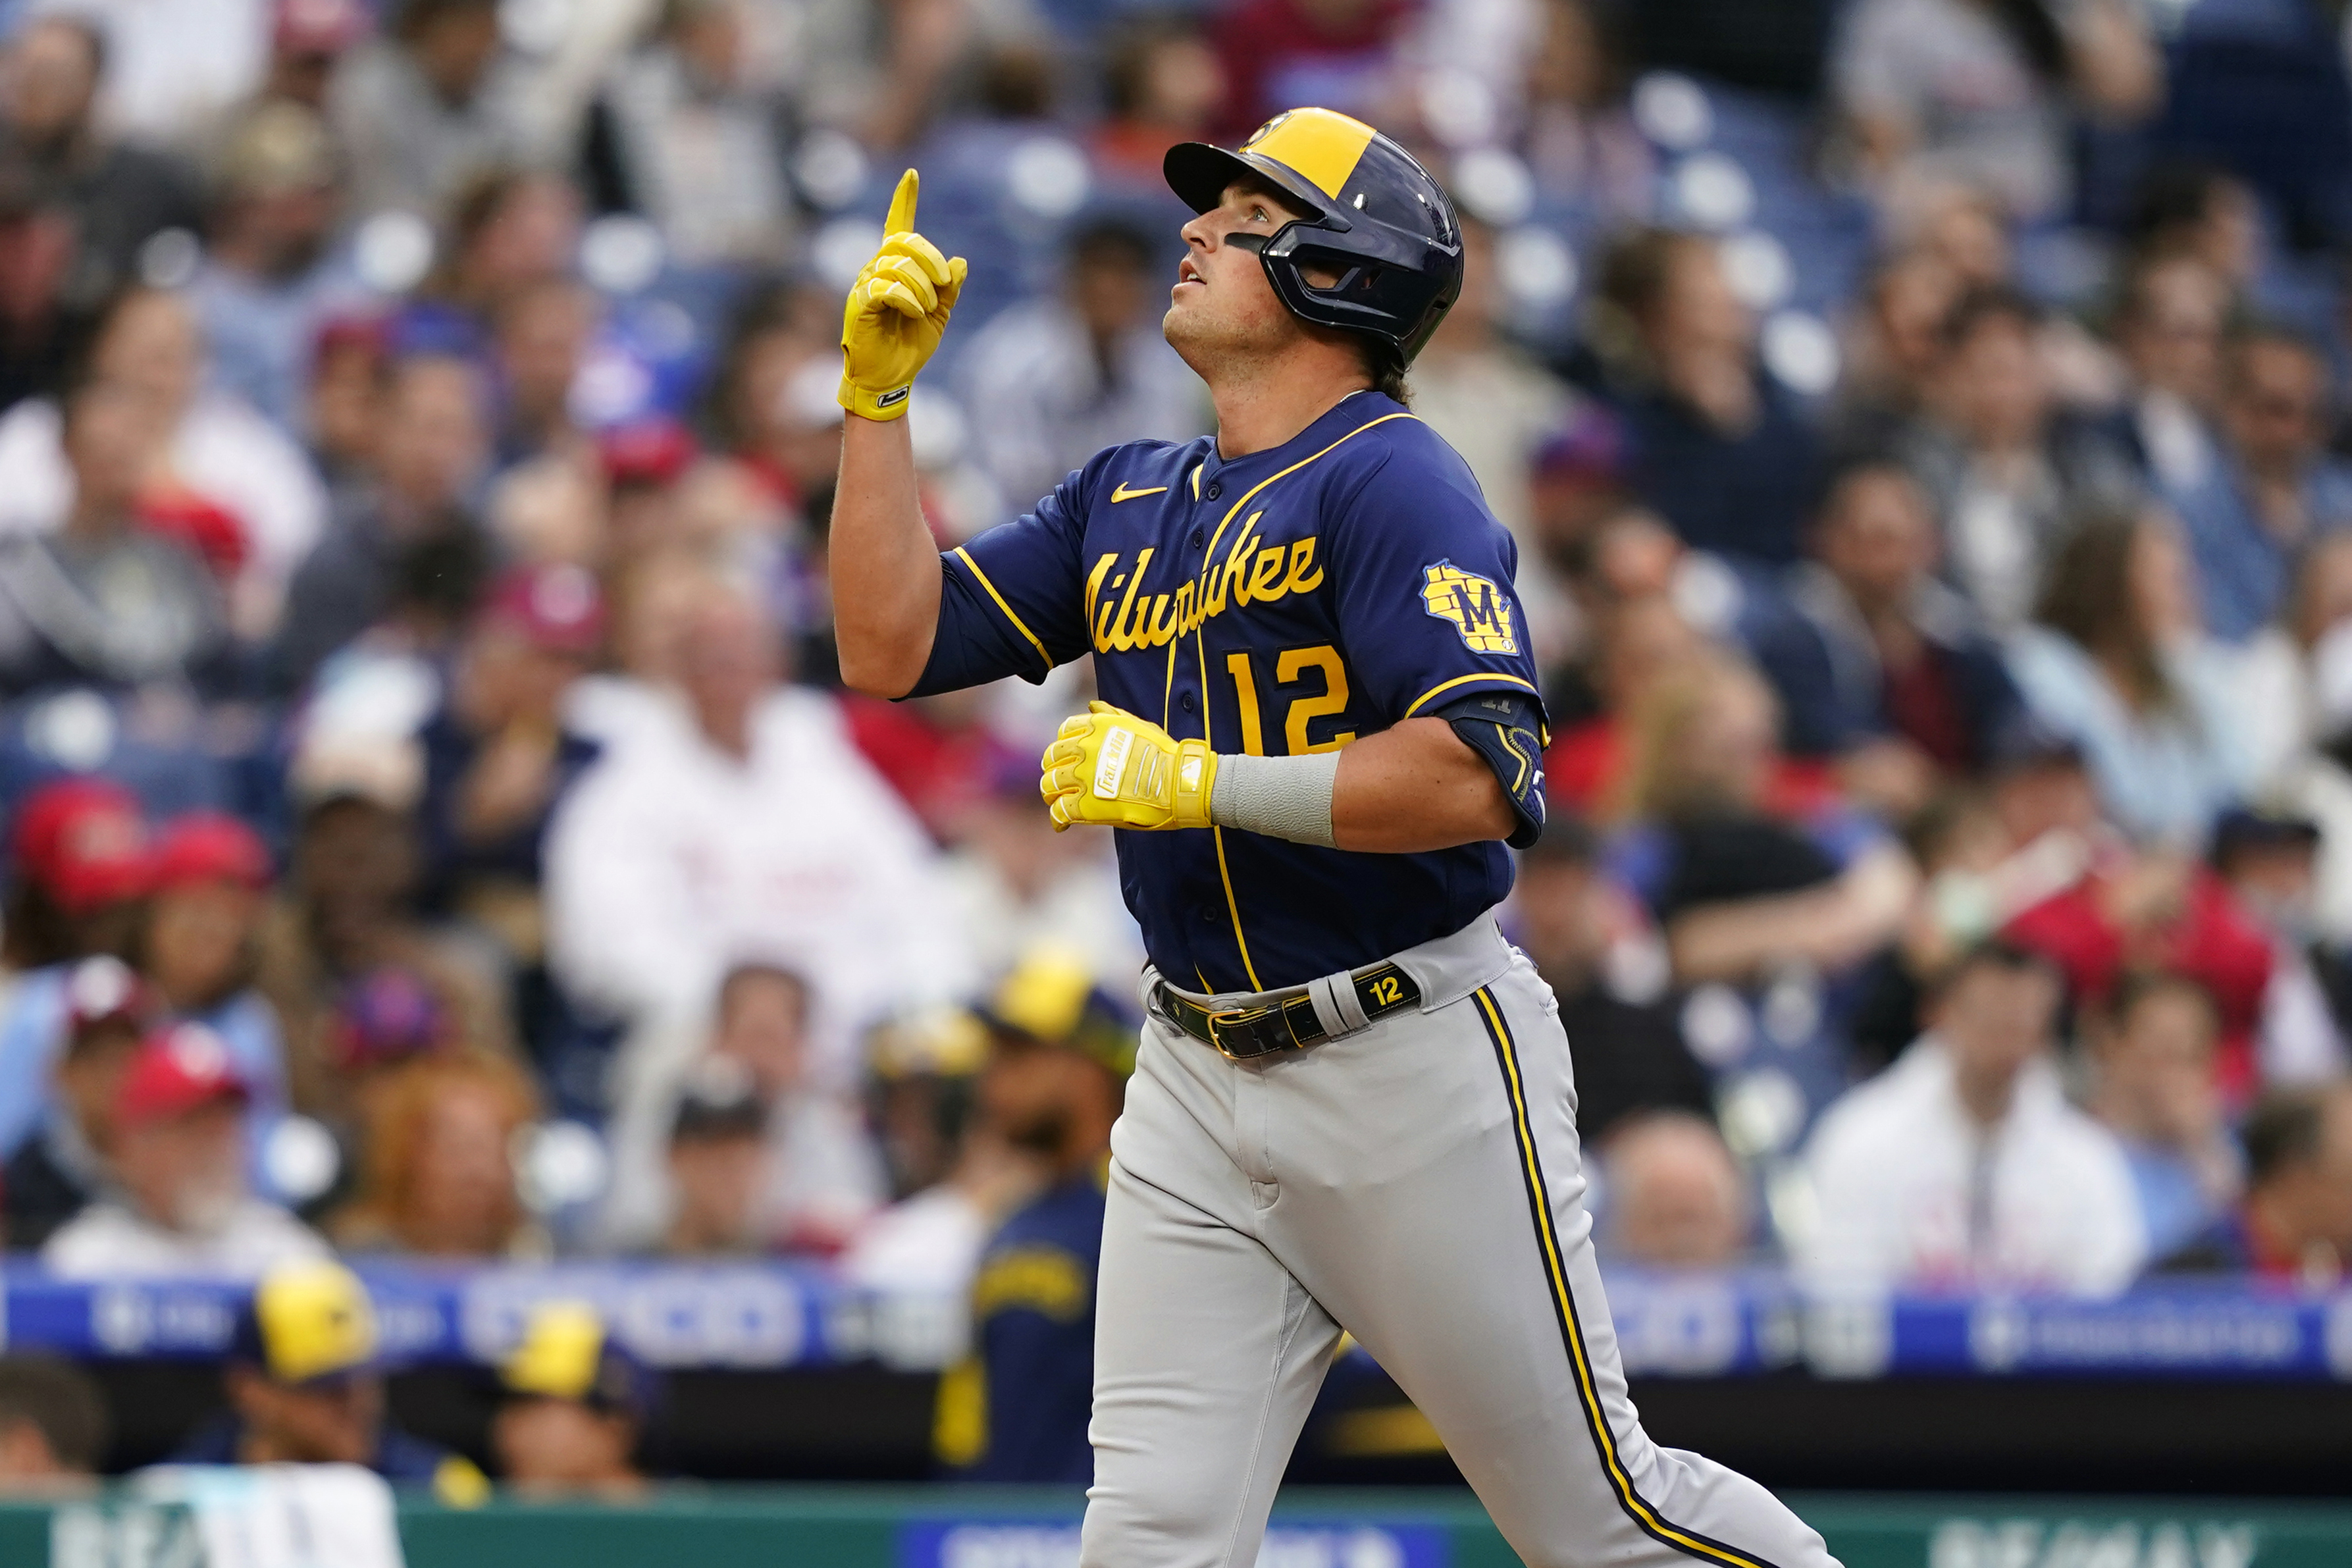 MLB fans react to Angels acquiring Hunter Renfroe from the Brewers